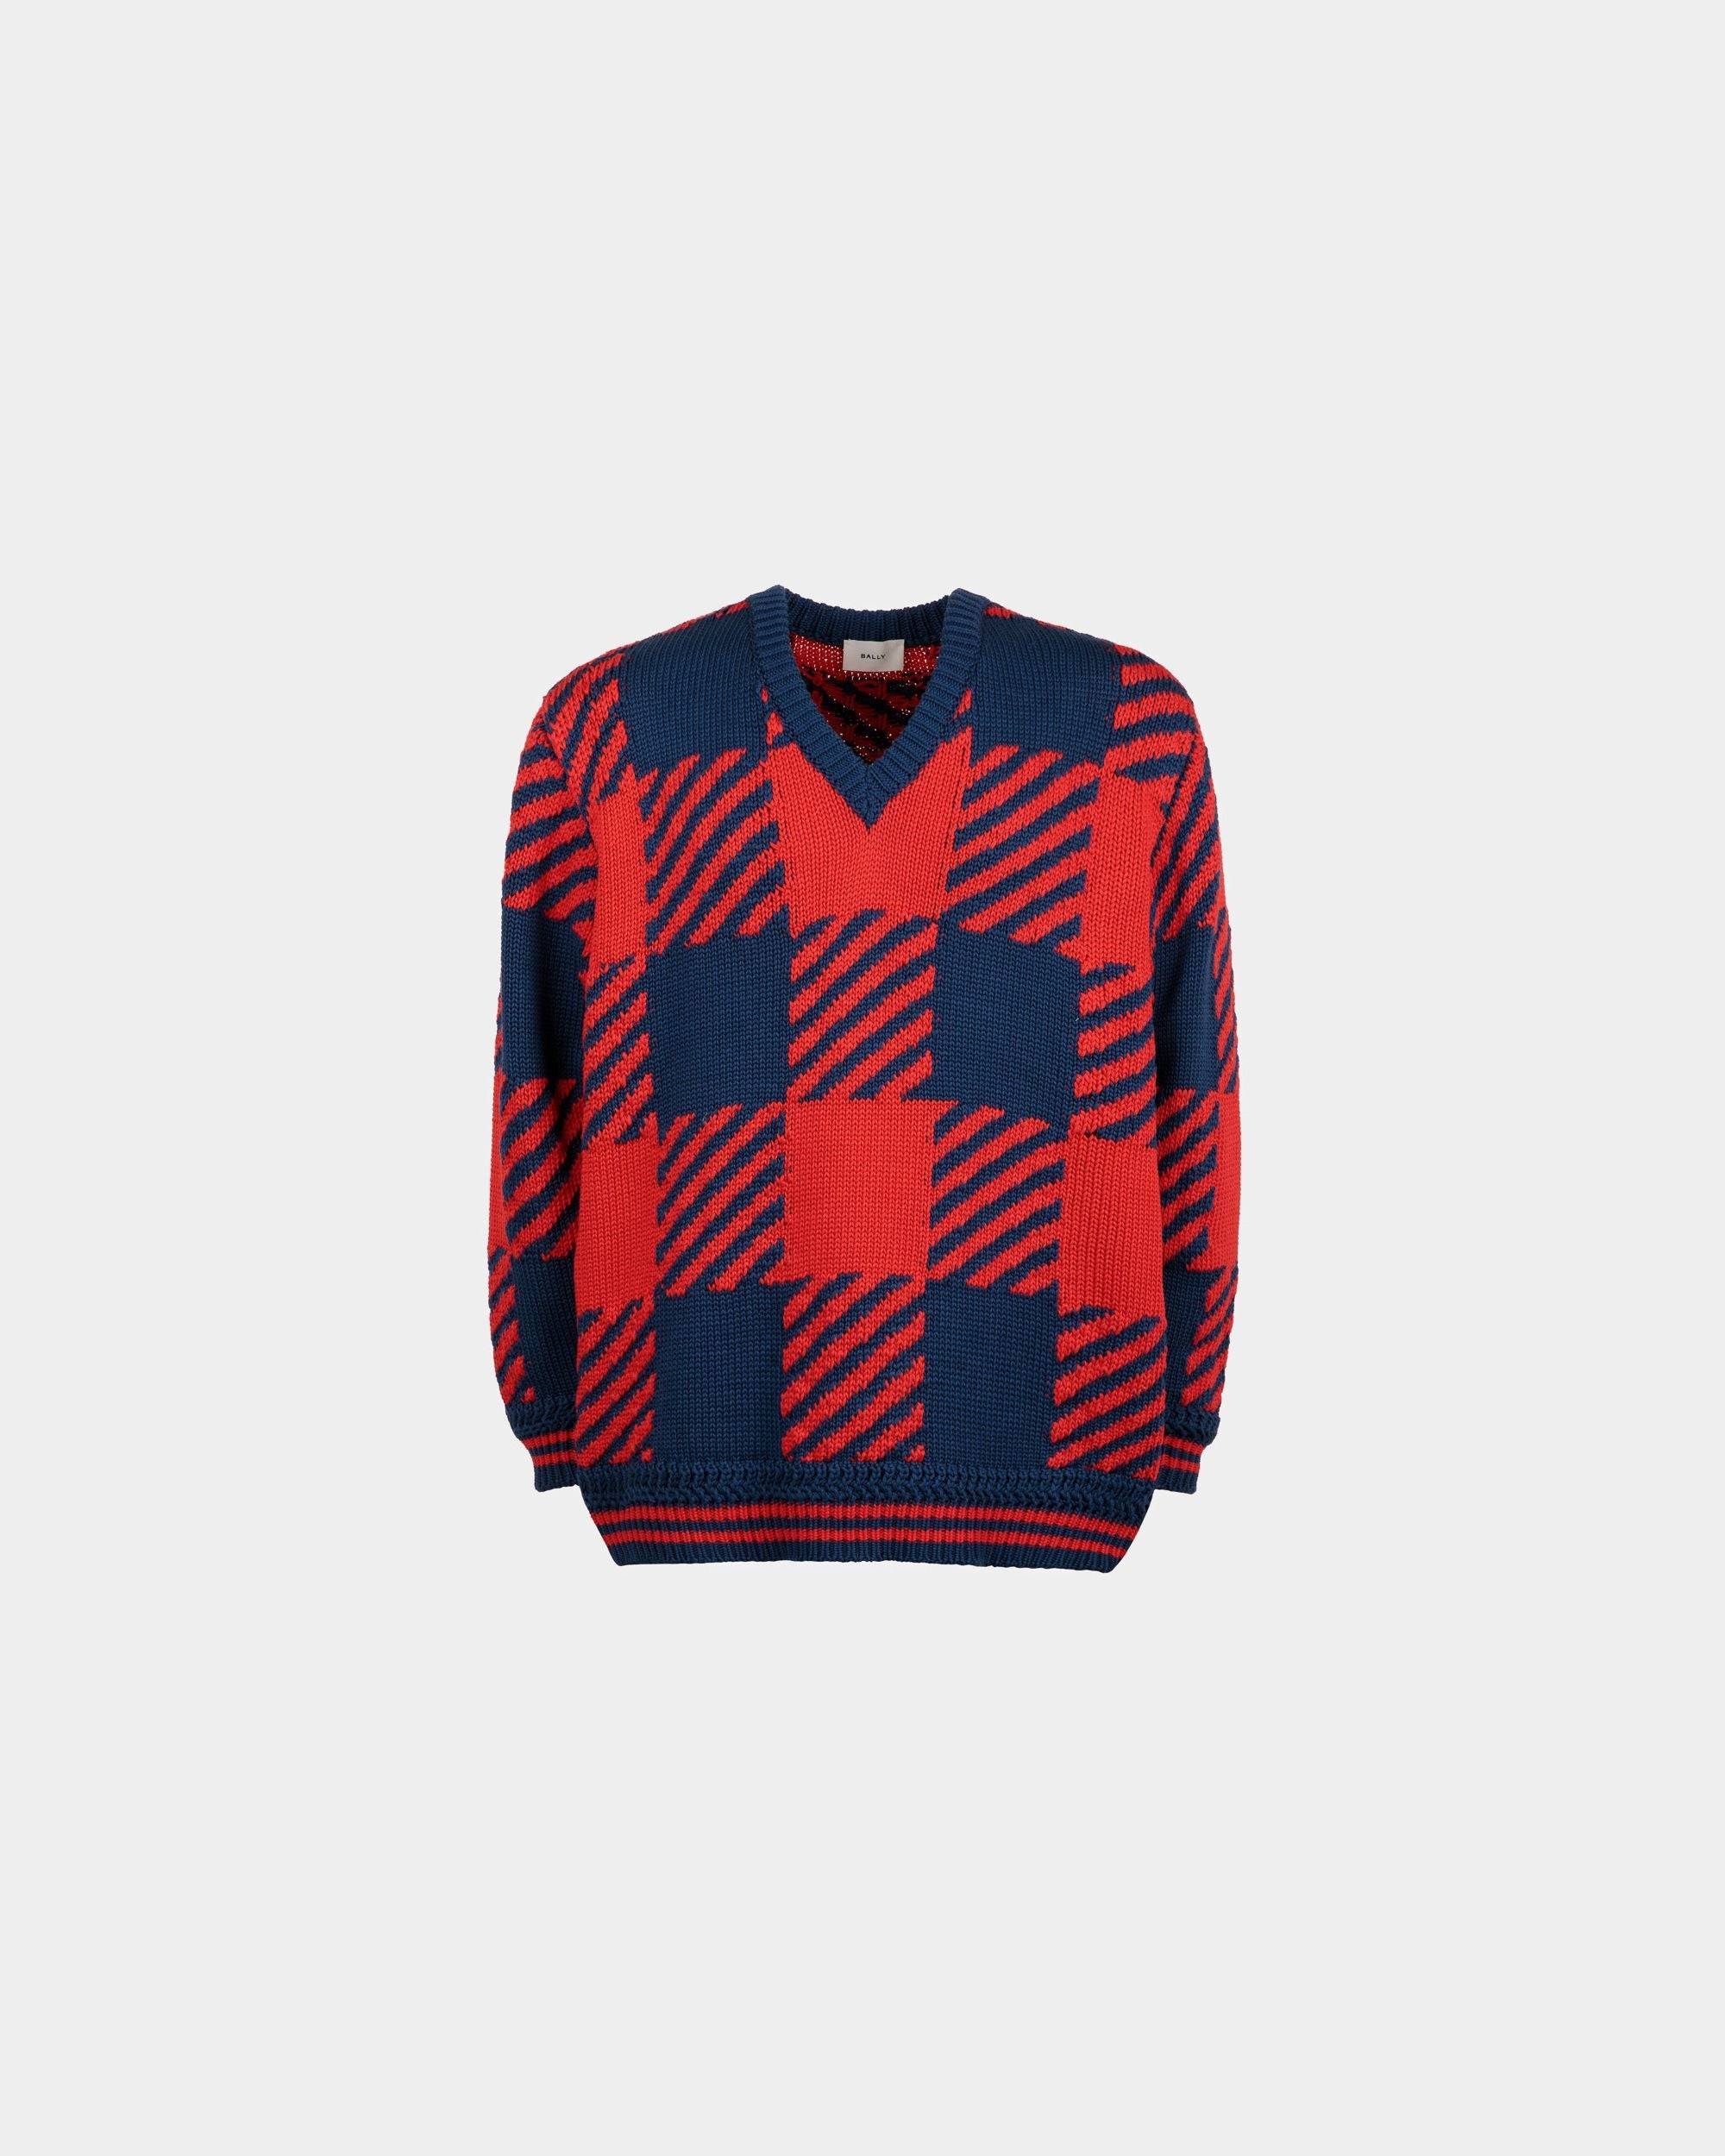 Men's V-Neck Sweater in Red and Blue Cotton | Bally | Still Life Front